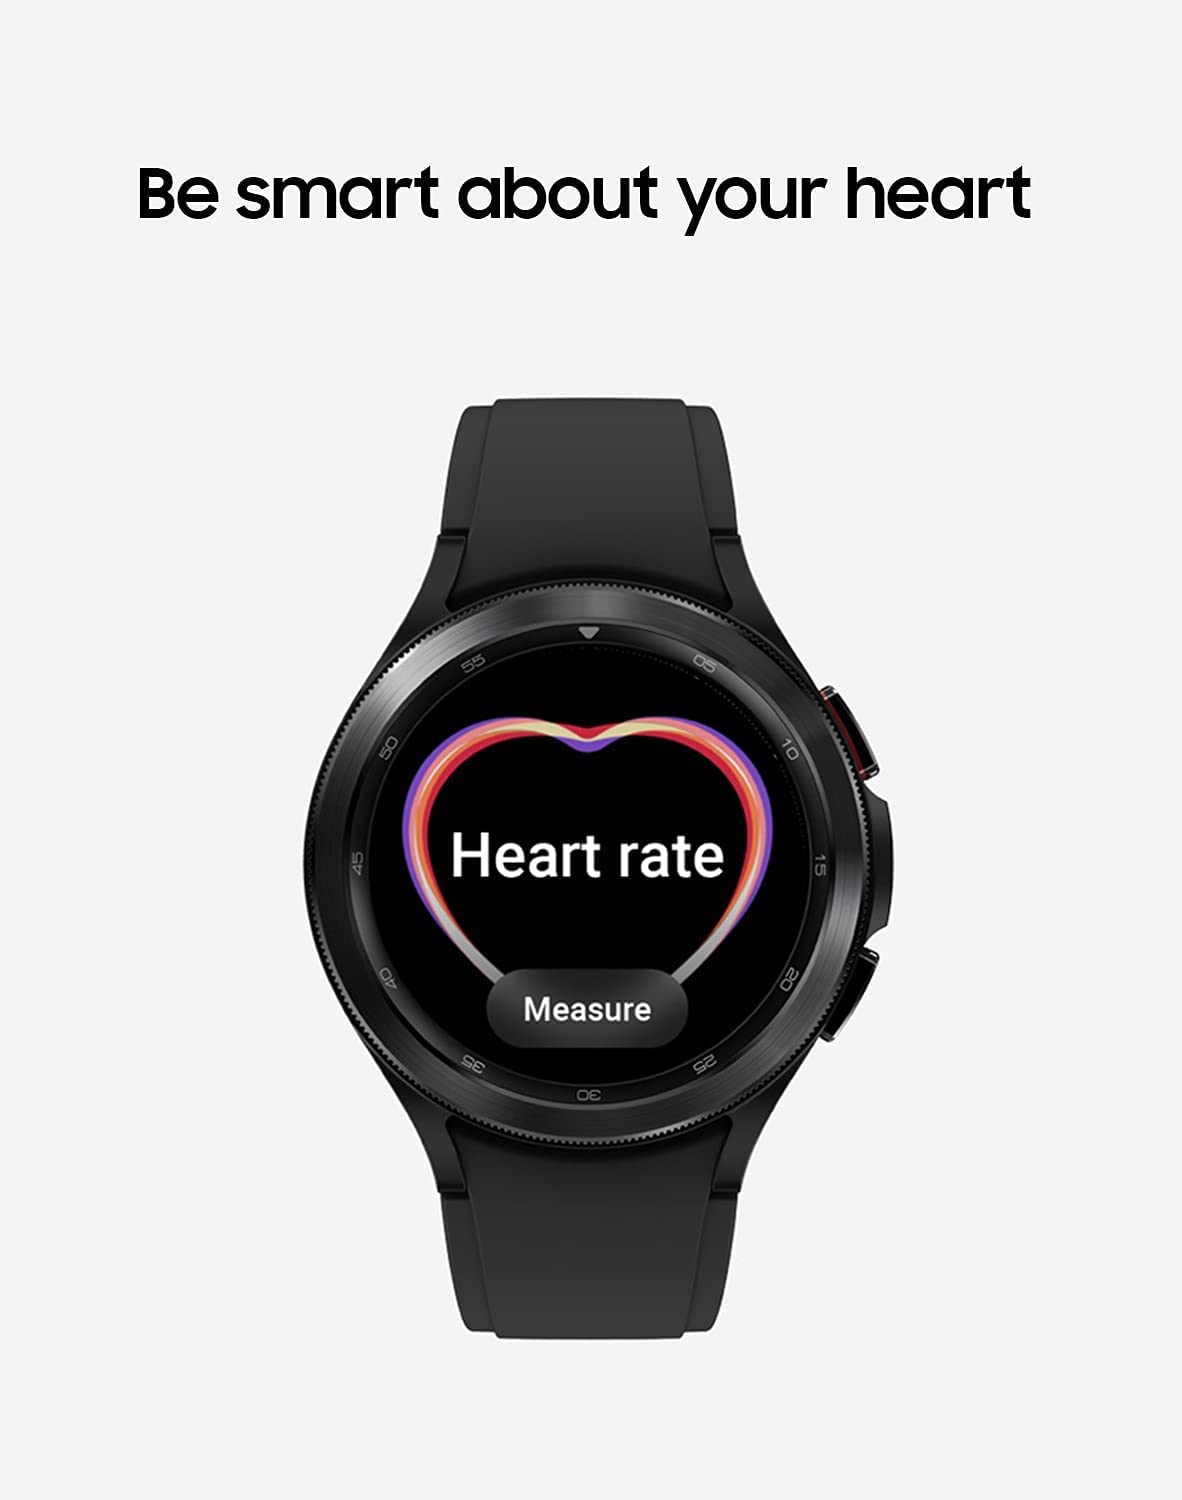 Samsung Galaxy Watch 4 Classic 46mm Smartwatch with ECG Monitor Tracker for Health Fitness Running Sleep Cycles GPS Fall Detection LTE US Version, Black (Renewed)